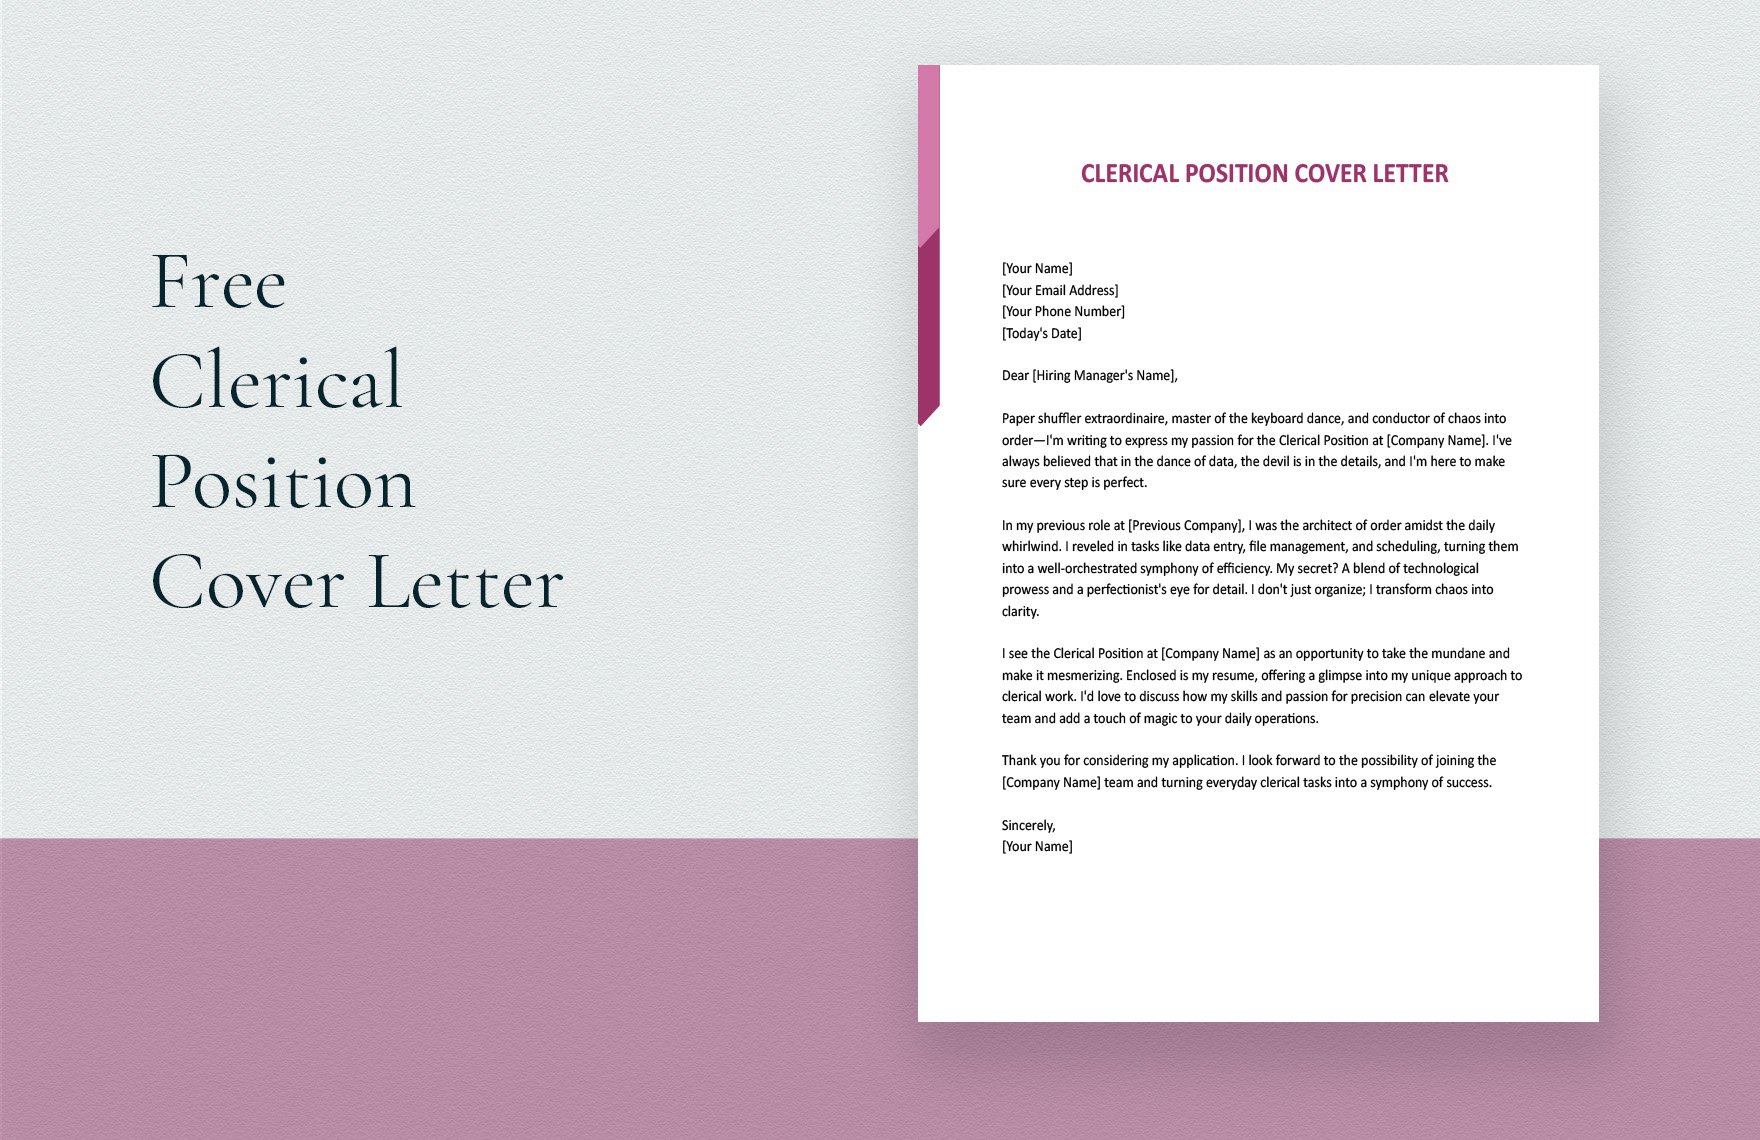 Clerical Position Cover Letter